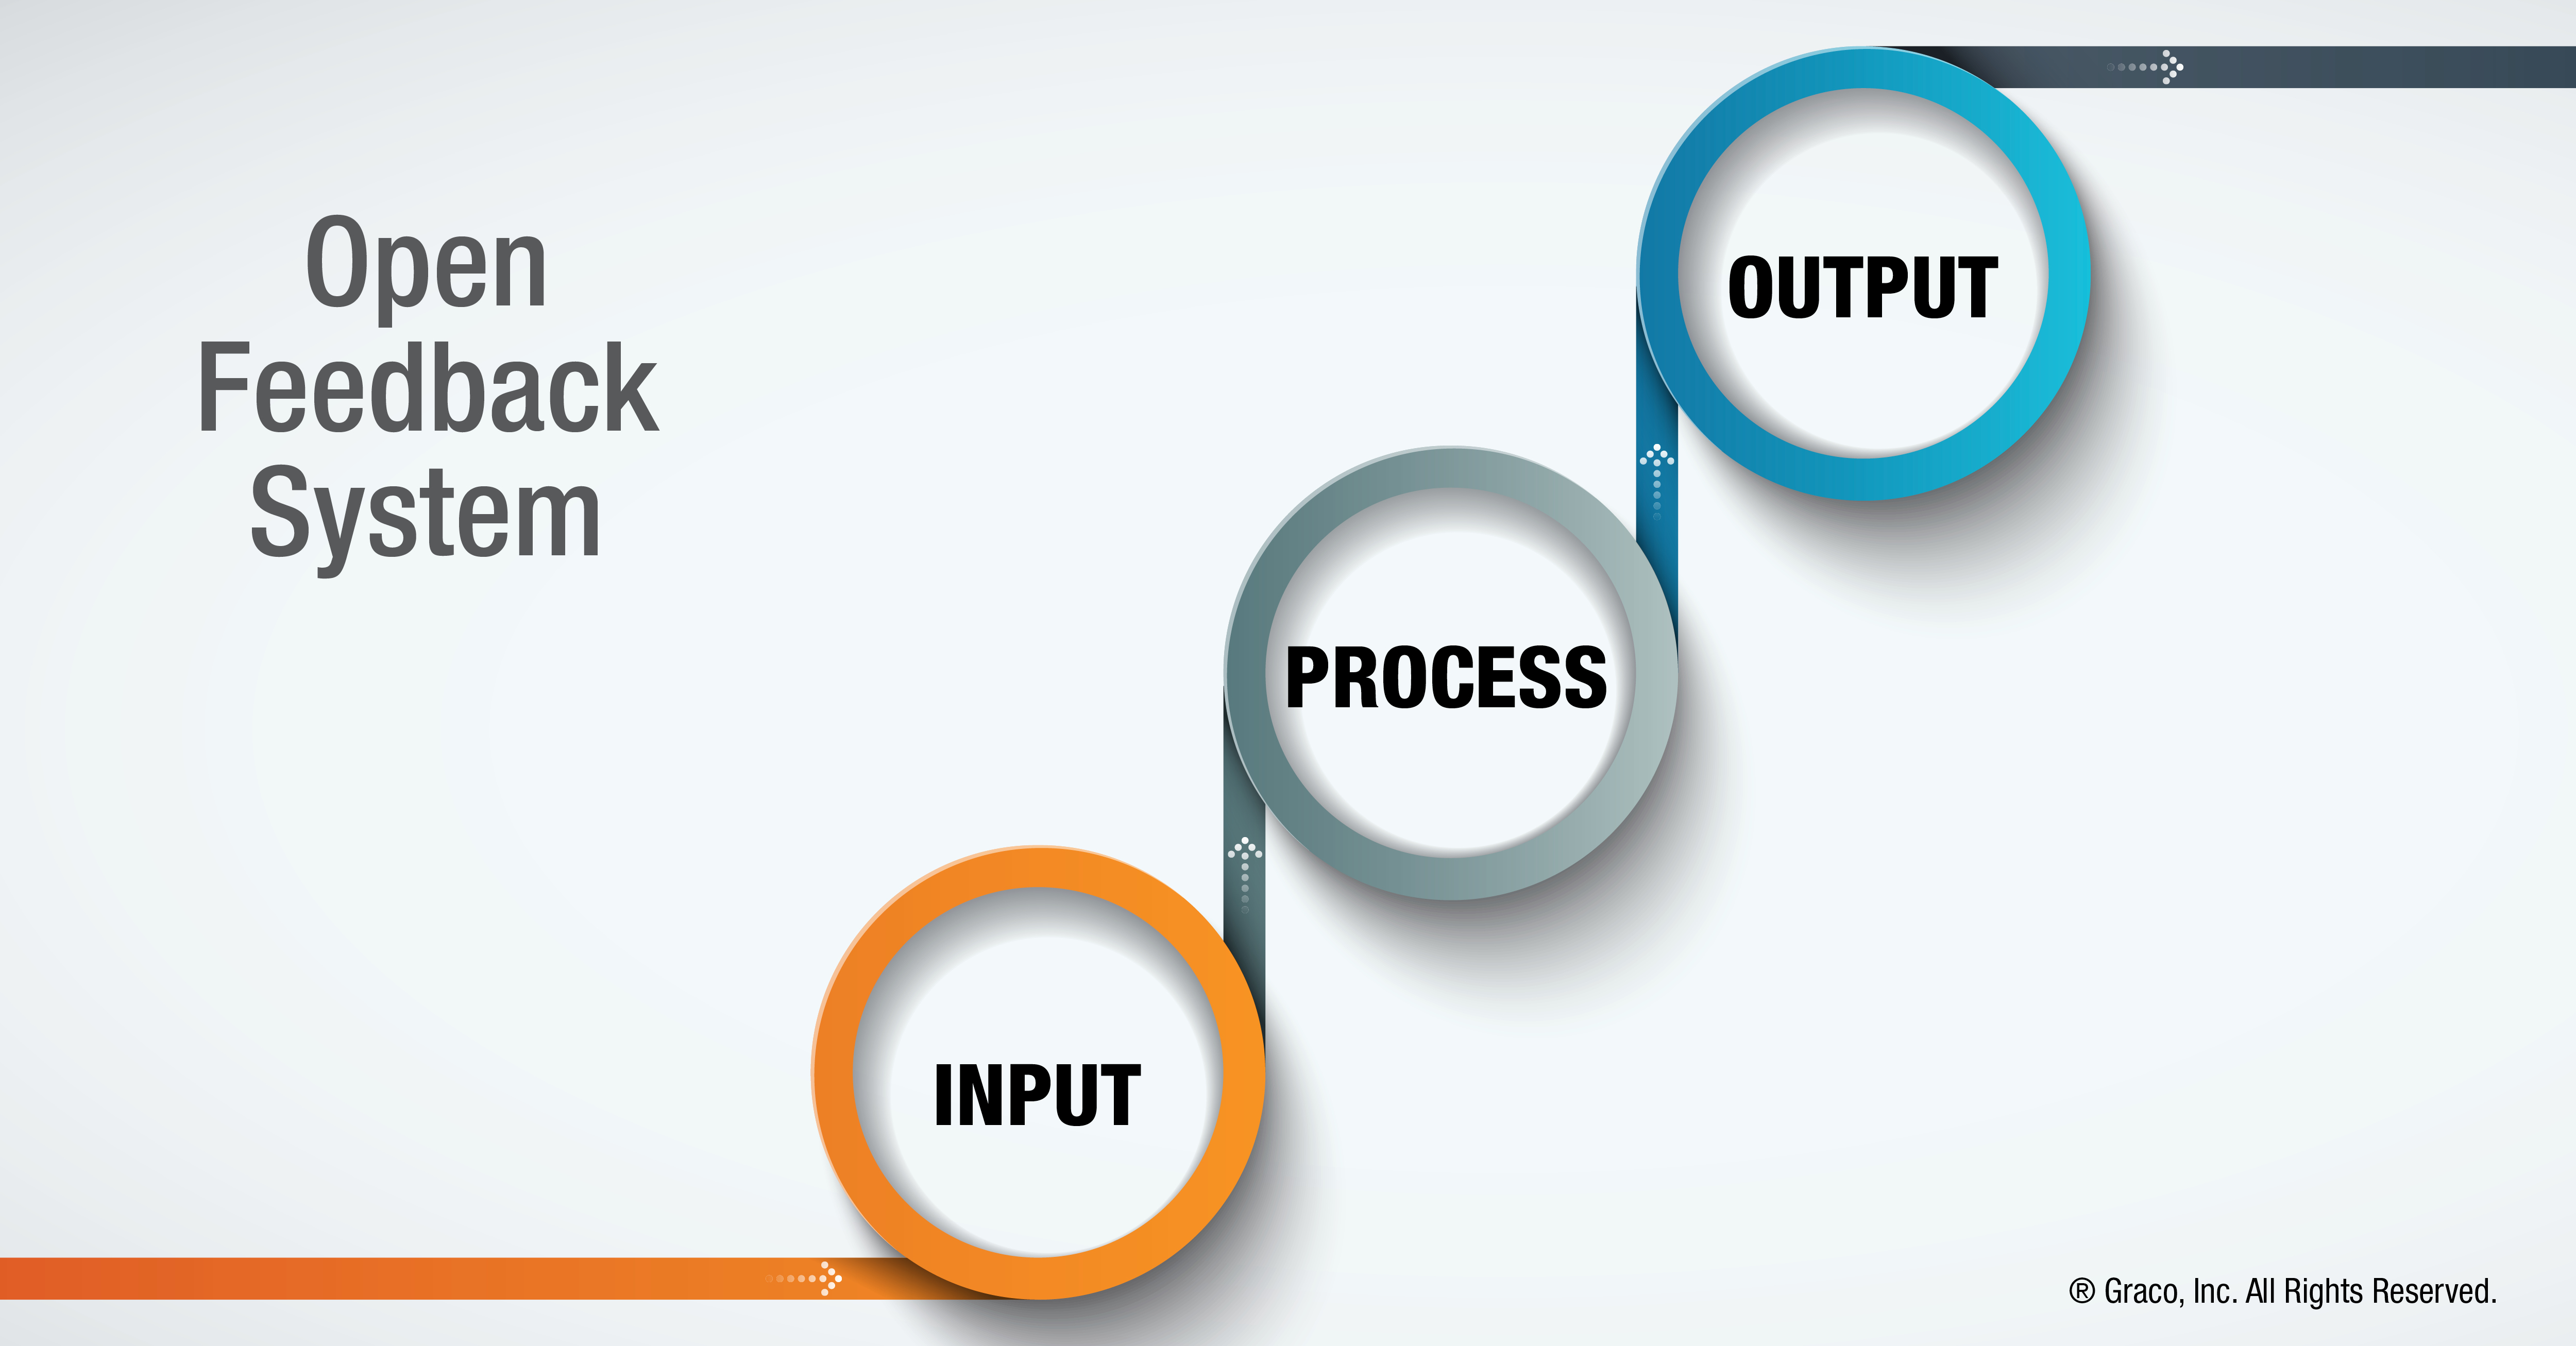 Infographic shows the cycle of an open feedback system, starting from input to process to output.